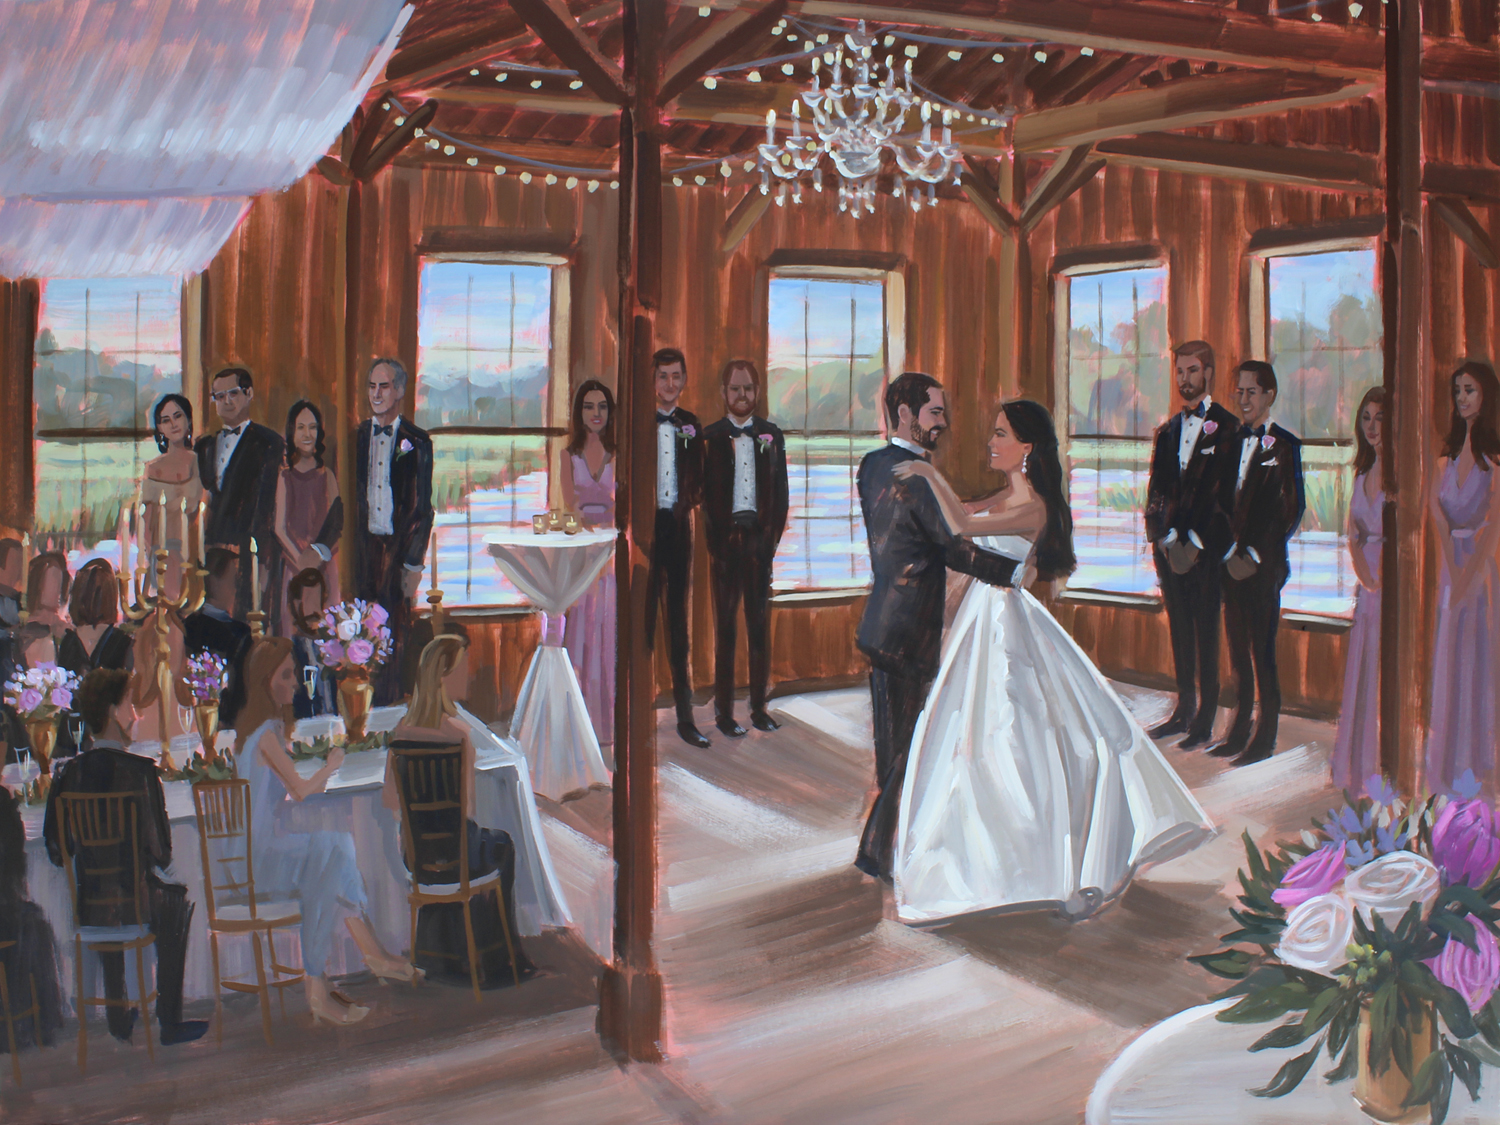 Carolina + Jacob commissioned live wedding painter, Ben Keys, to capture their first dance during their reception held at Charleston’s Boone Hall Plantation.